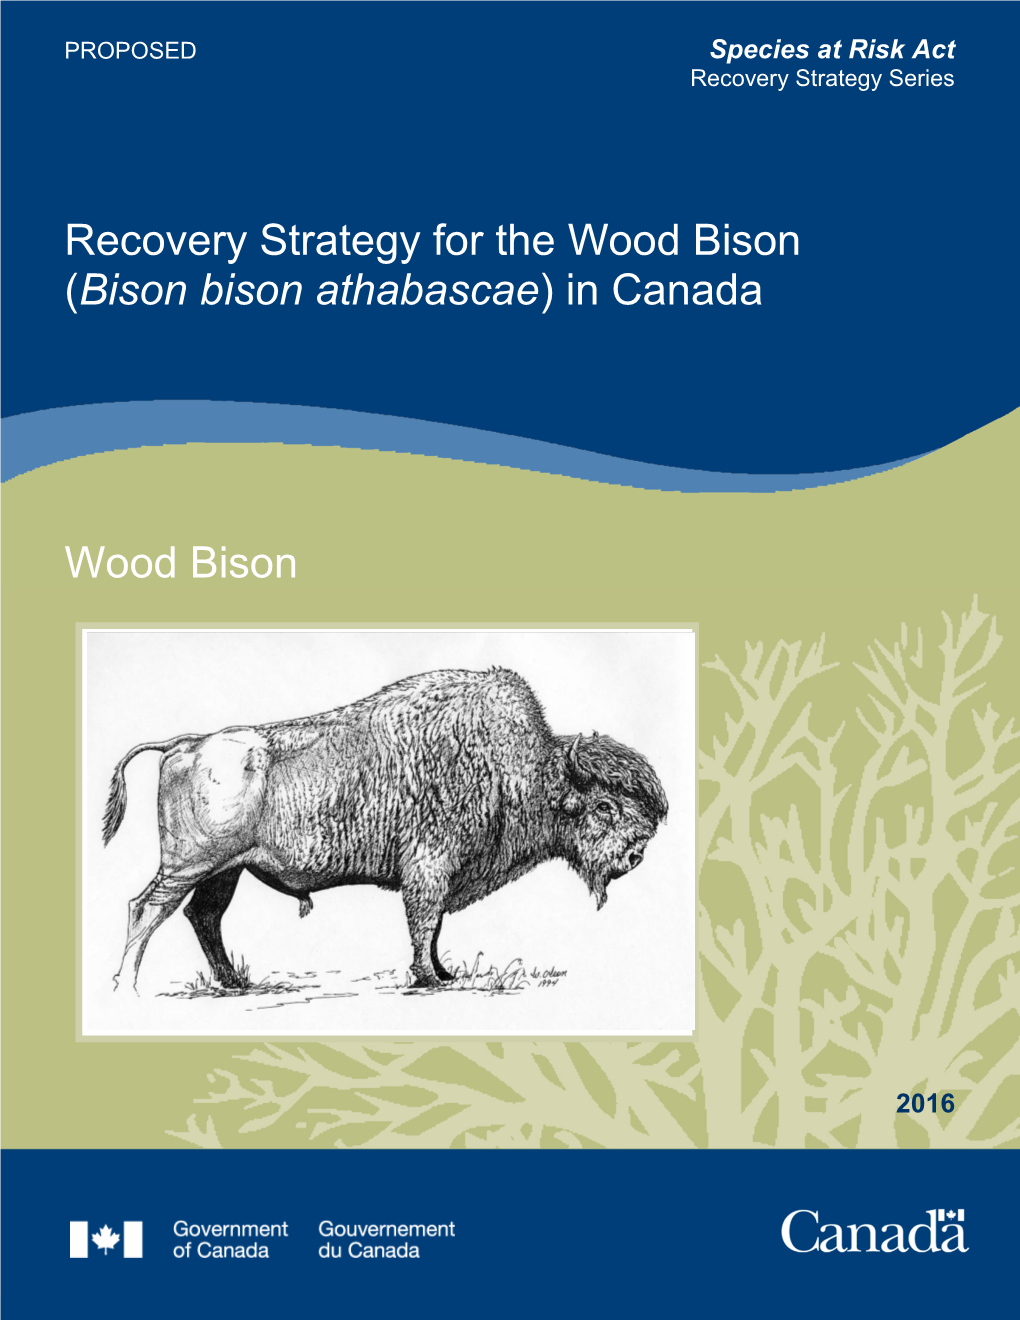 Recovery Strategy for the Wood Bison (Bison Bison Athabascae) in Canada [Proposed]